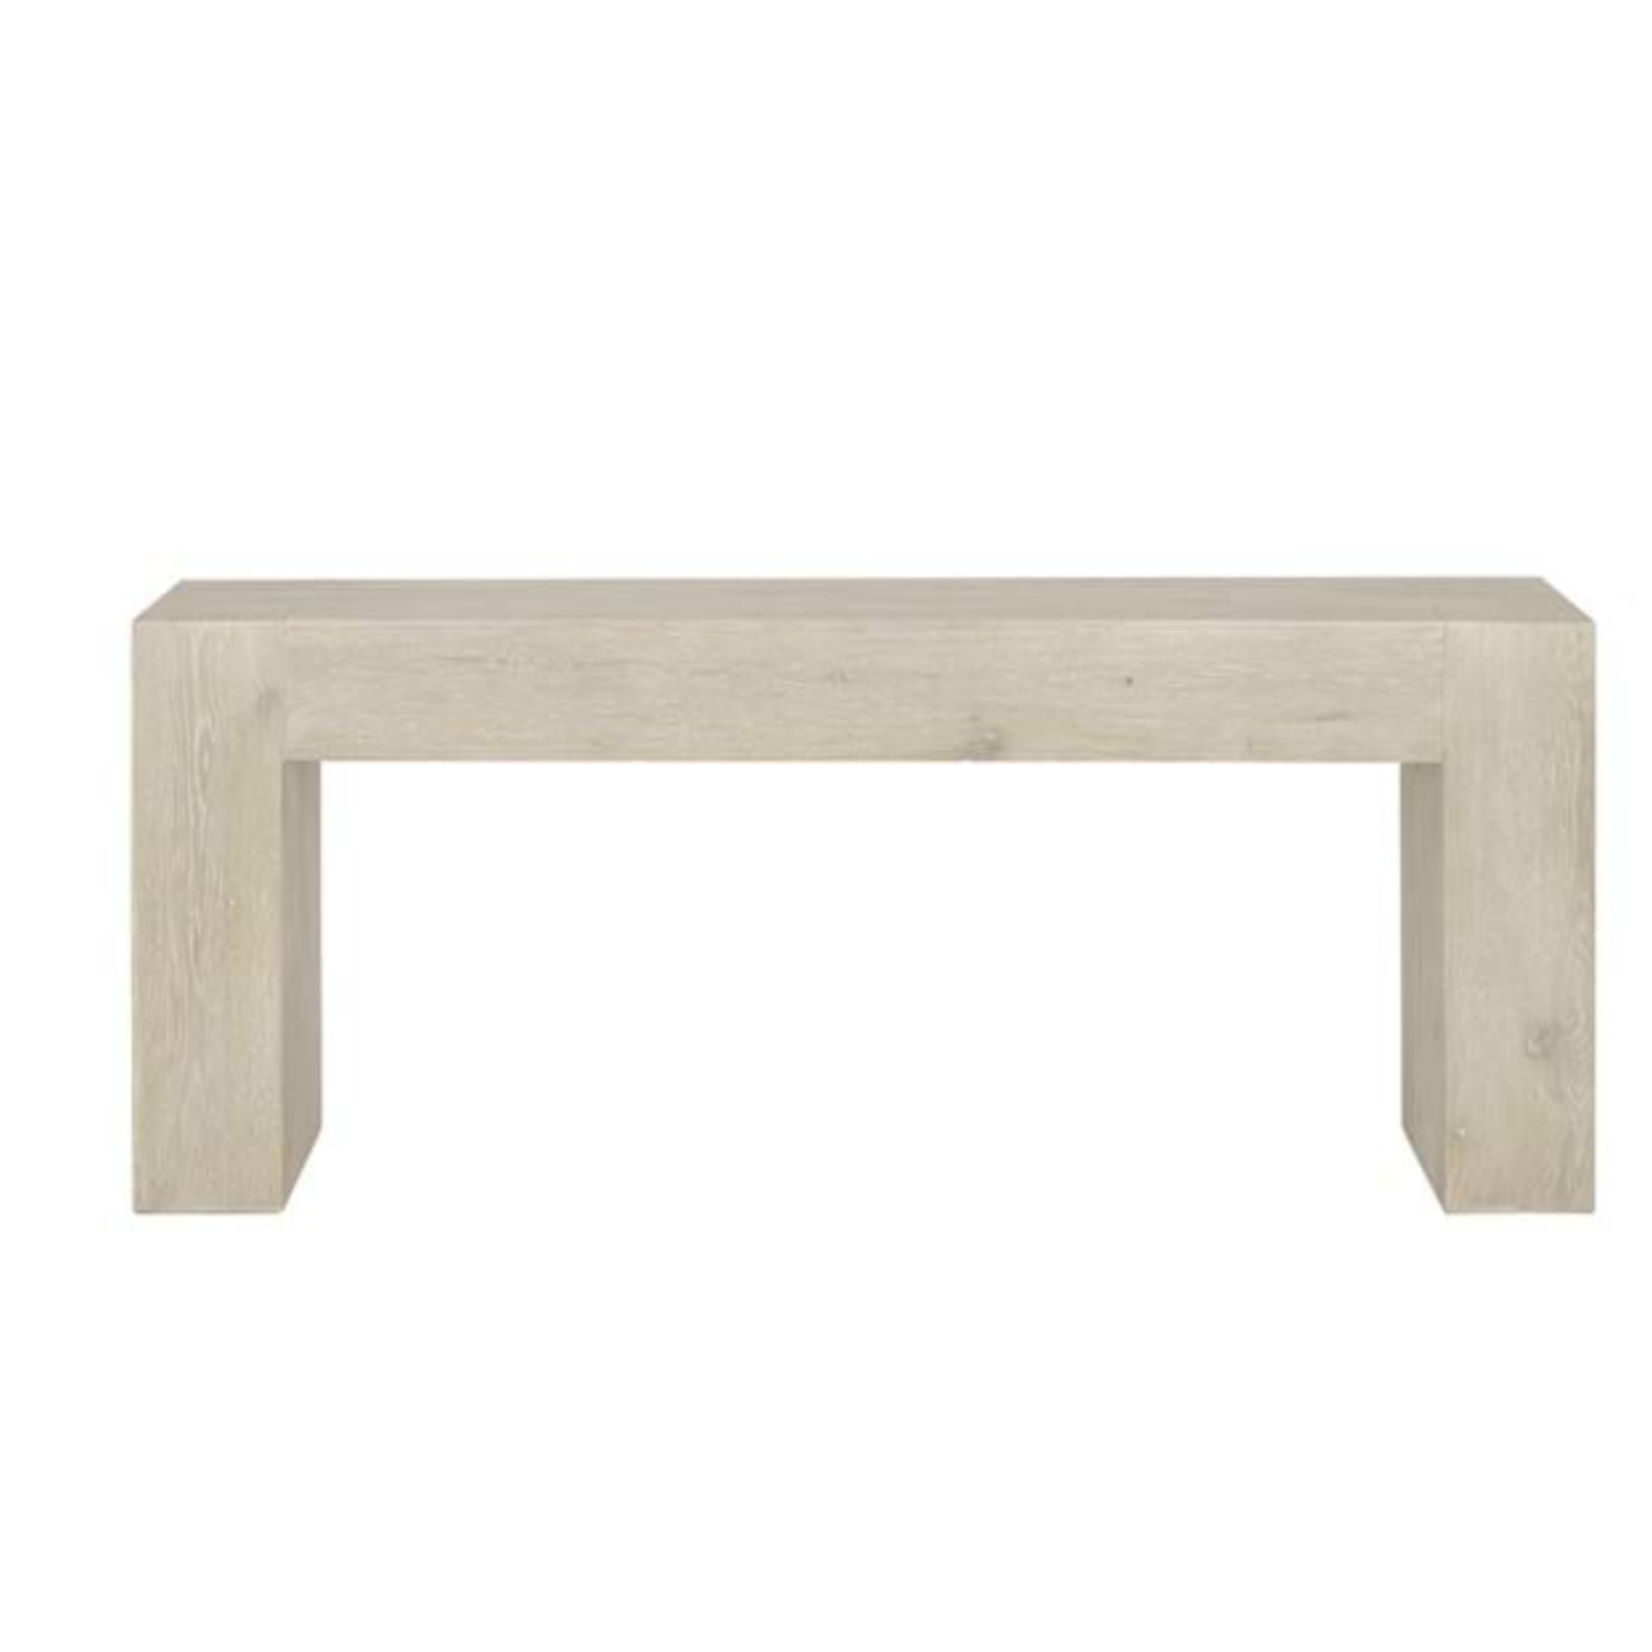 Outside The Box 72x16x30 Bristol Reclaimed Oak Console Table In White Wash